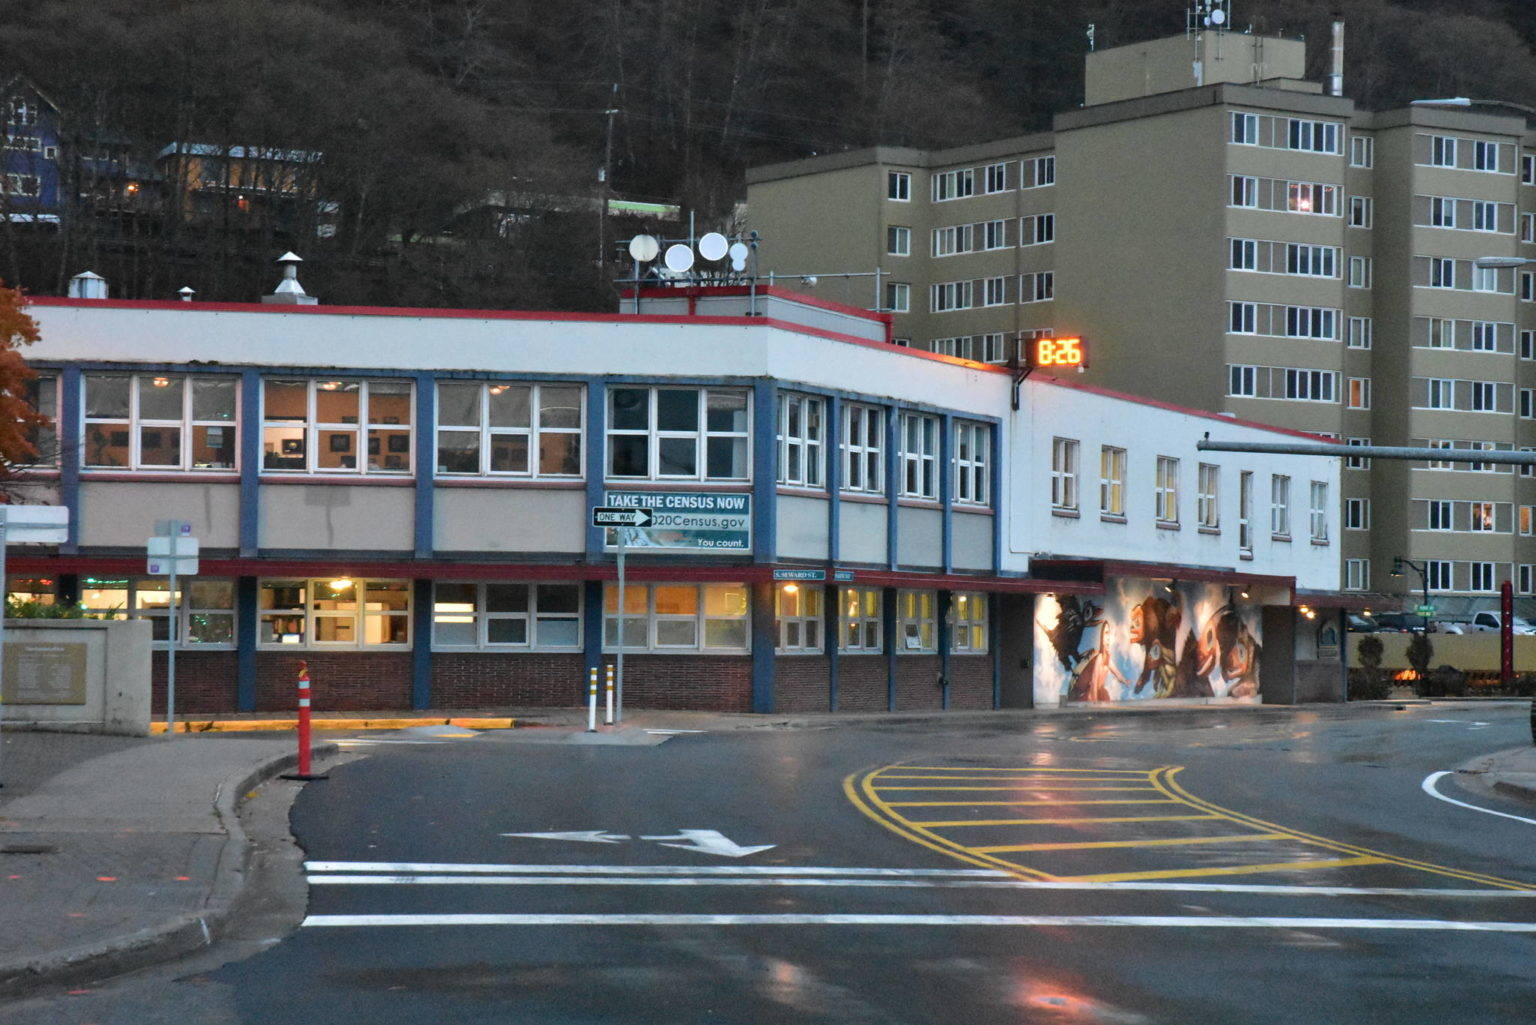 At Monday night’s Committee of the Whole meeting, City and Borough of Juneau Assembly members agreed to take a closer look at the city’s arrangement with Travel Juneau, the private marketing organization for the Juneau area. This photo shows Juneau City Hall on Tuesday, Oct. 24, 2020.  (Peter Segall / Juneau Empire File)